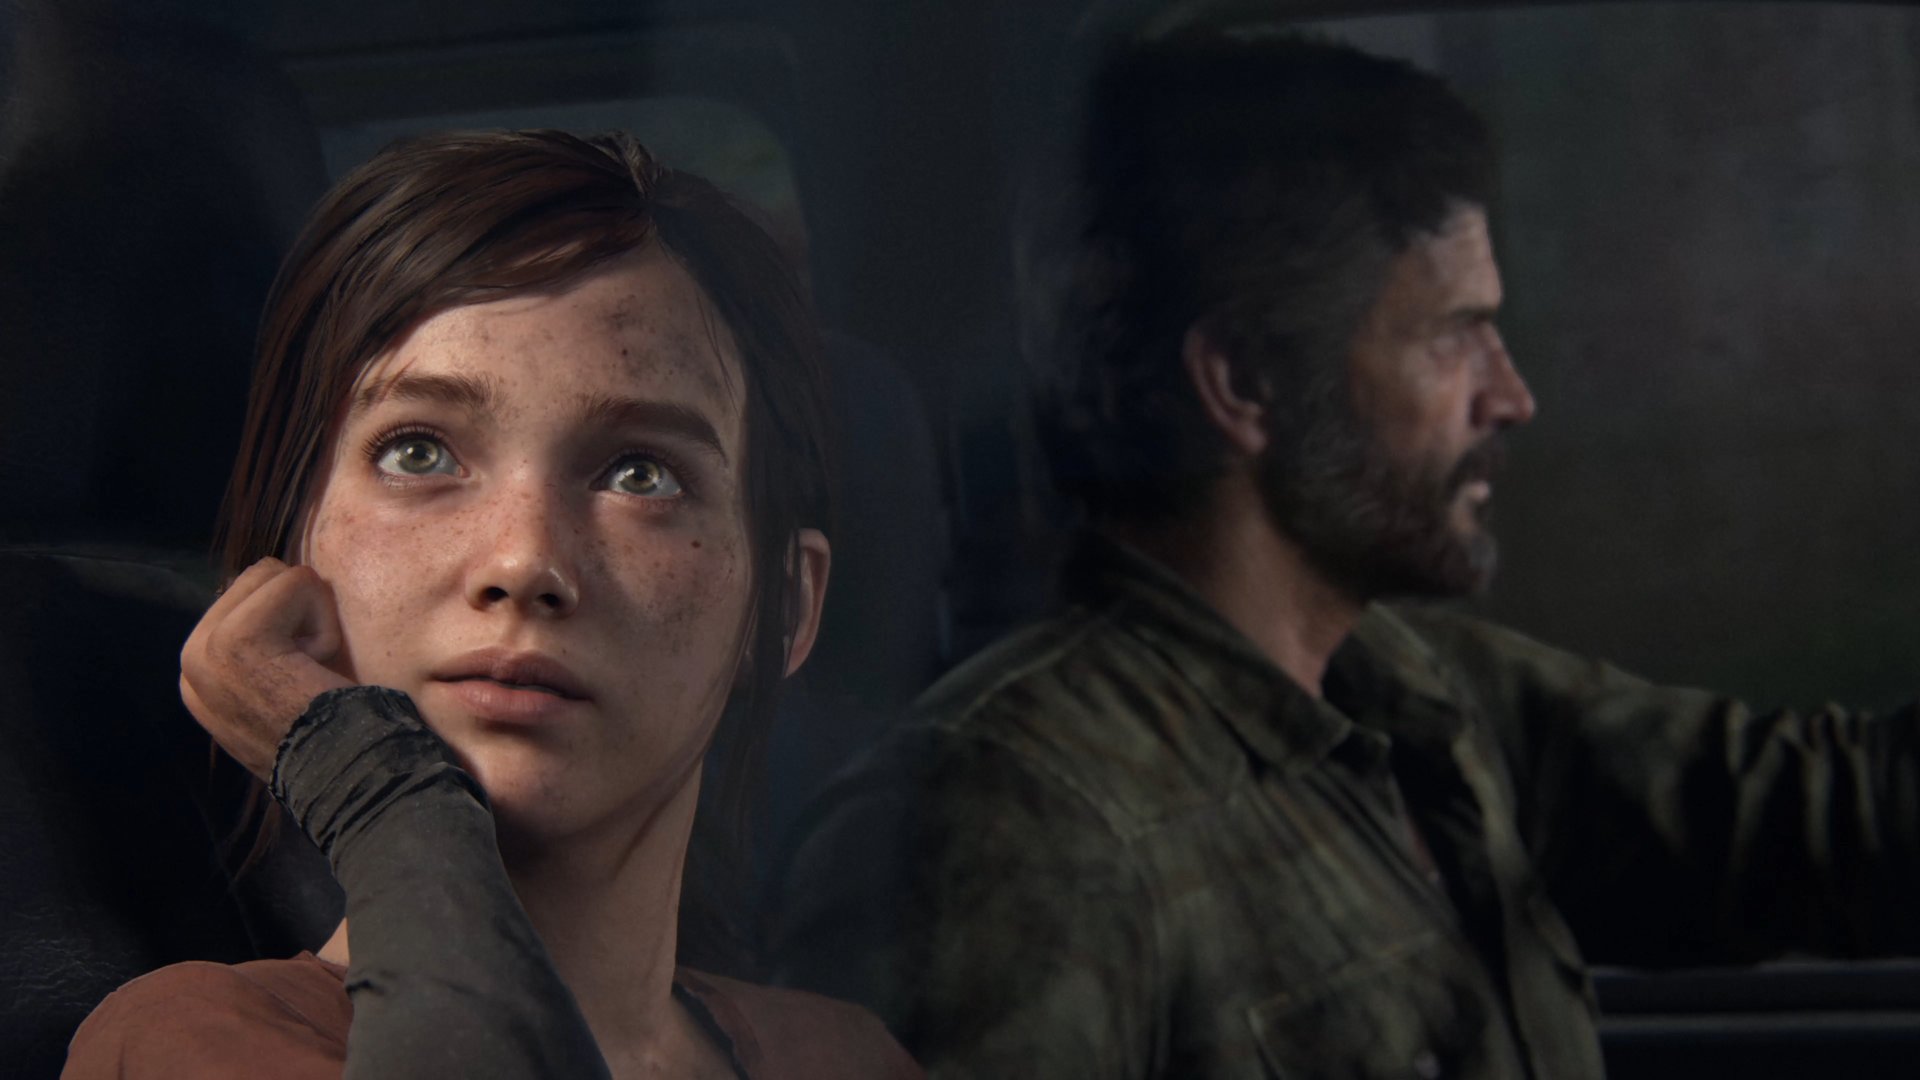 PCMR on X: The Last of US PC requirements are out and yeah